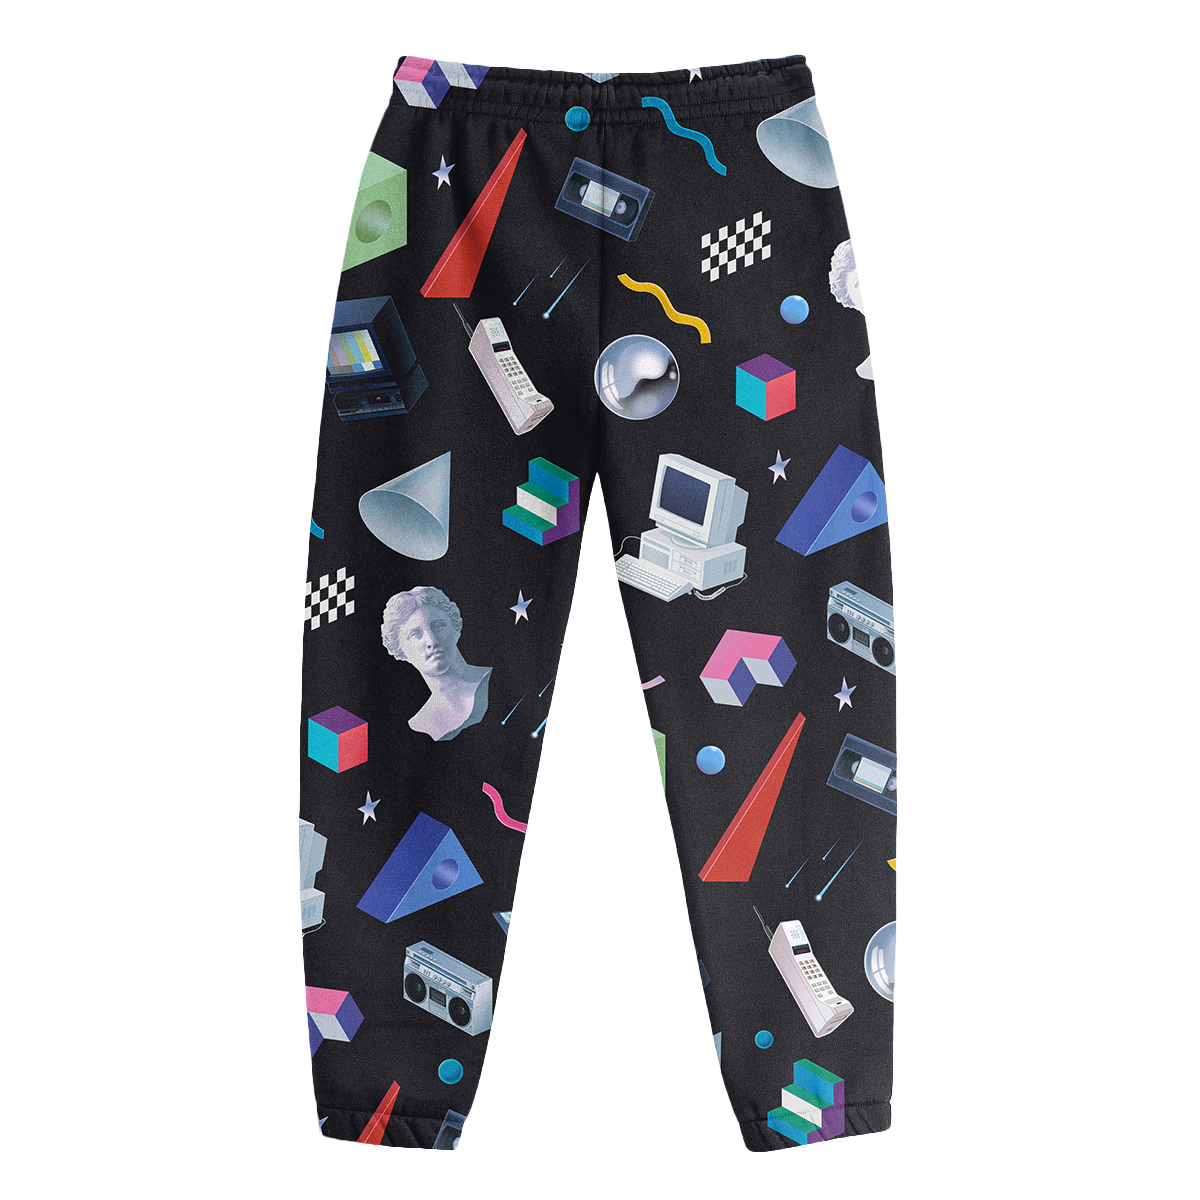 Shapes & Forms Joggers